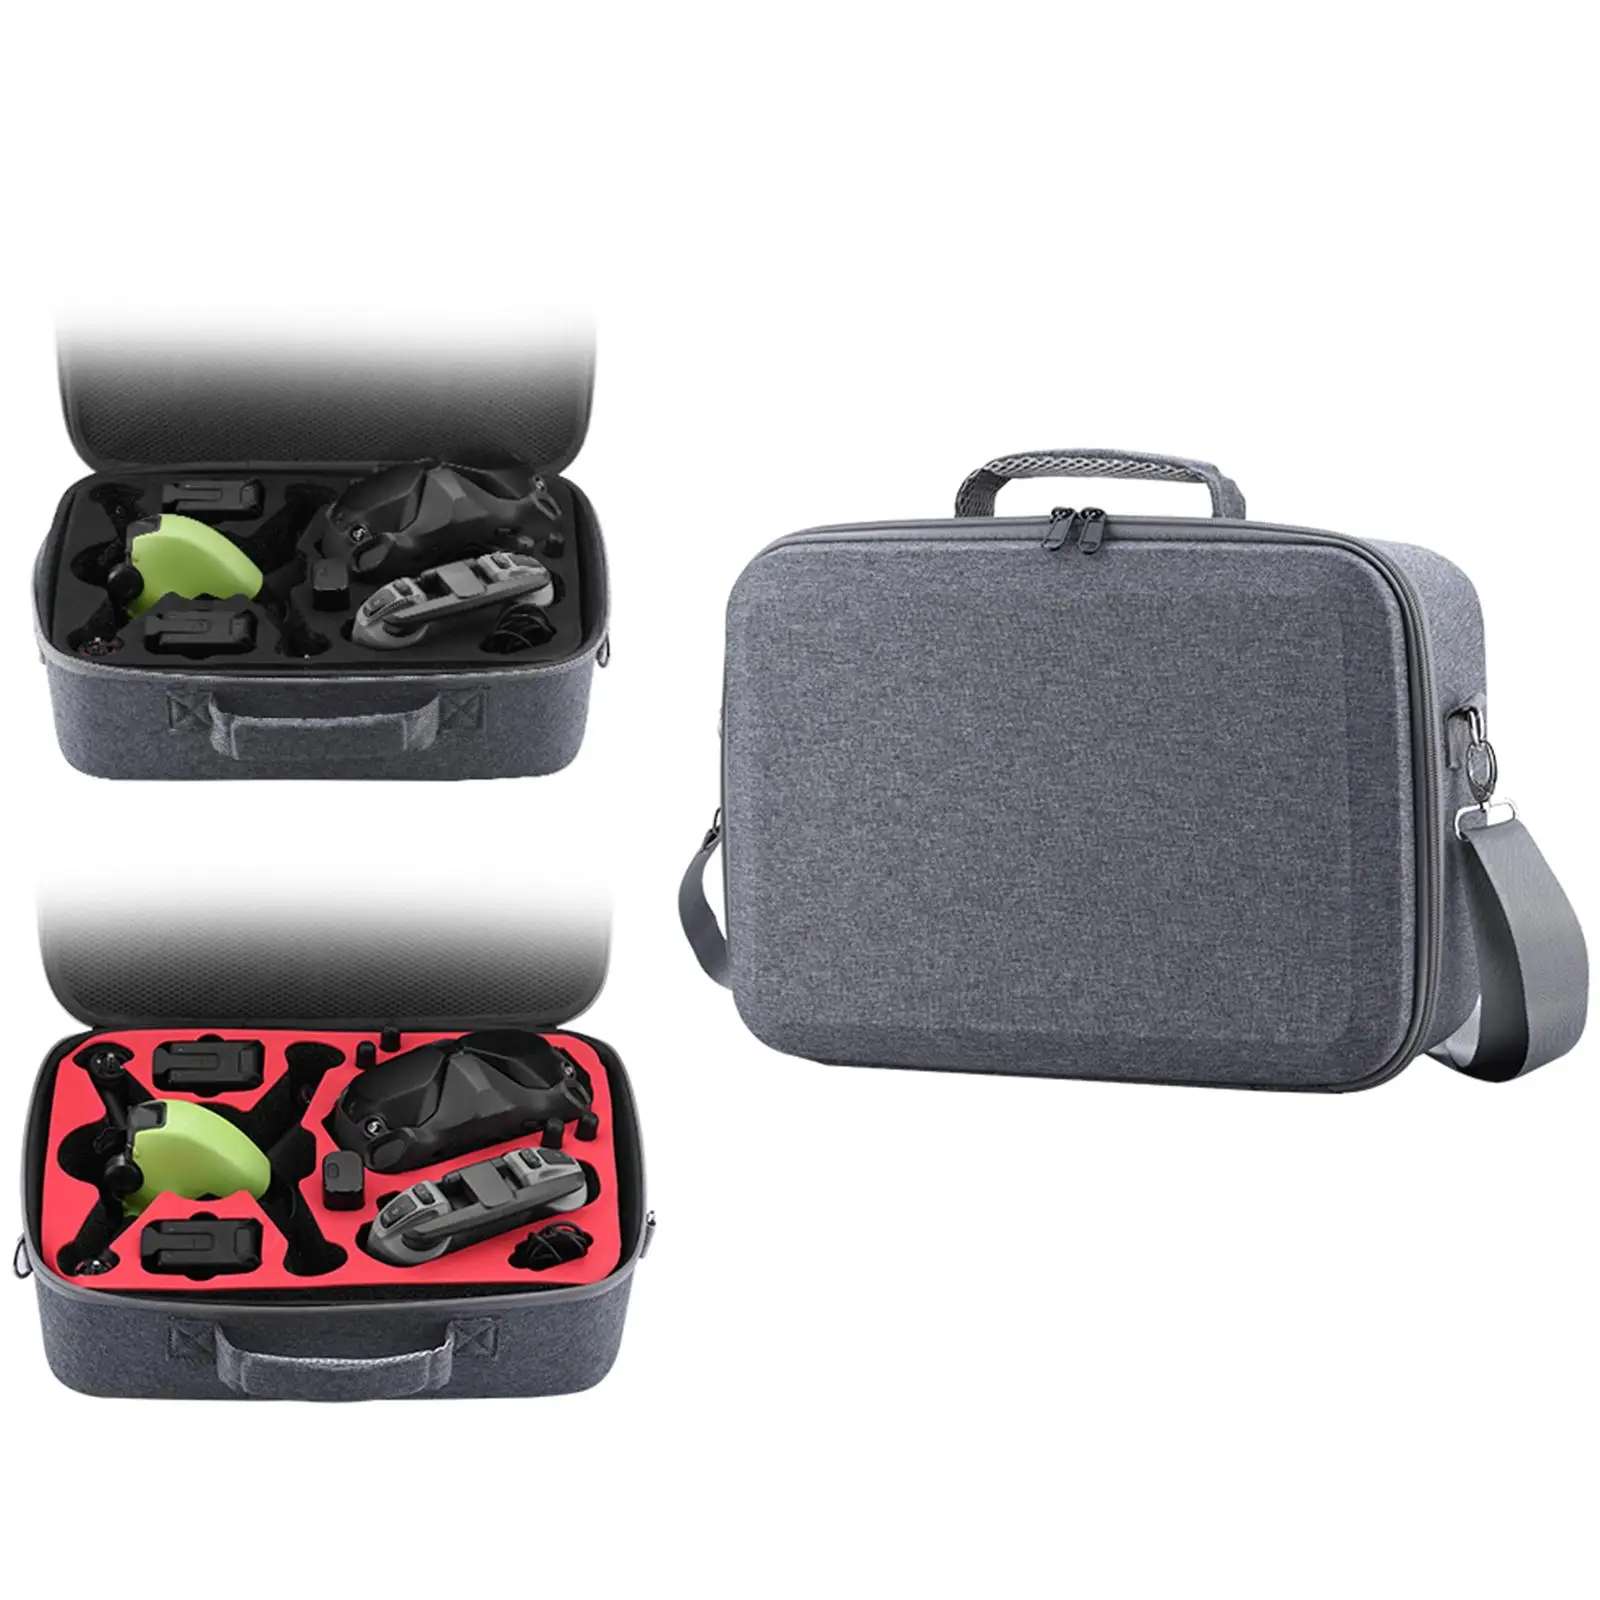 Portable  Storage Bag Shockproof Waterproof Carrying Case Handbag, for Combo Battery Accessories, Travel Bag